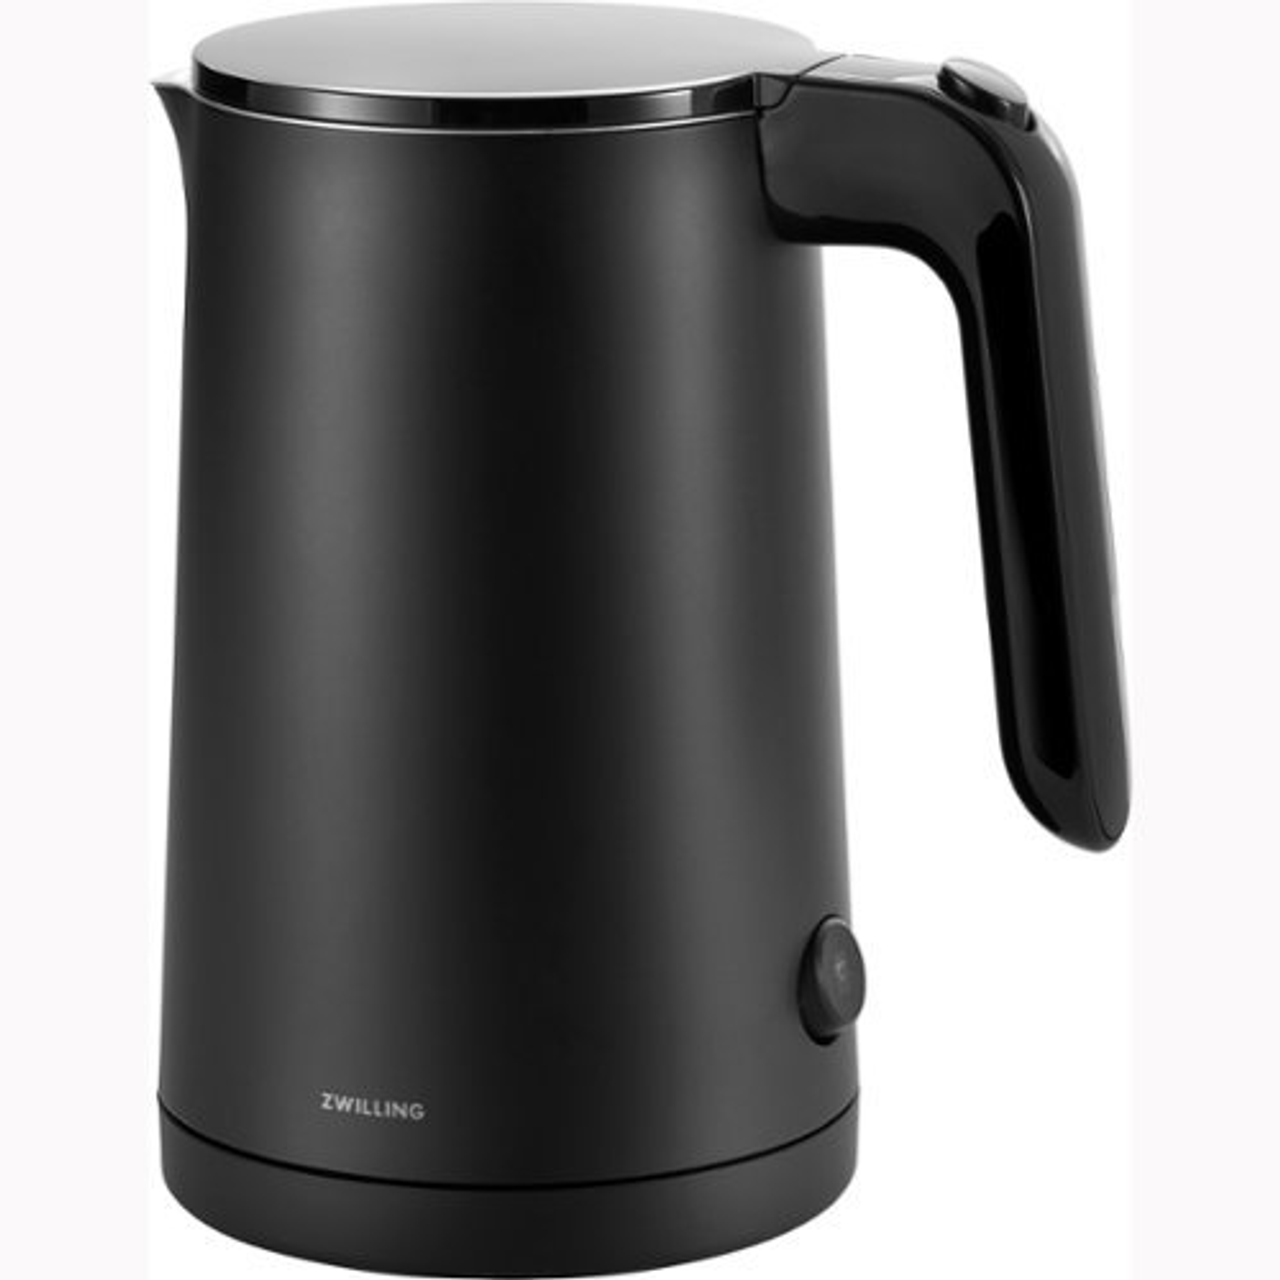 ZWILLING Enfinigy Cool Touch 1-Liter Electric Kettle, Cordless Tea Kettle & Hot Water - Black - Black